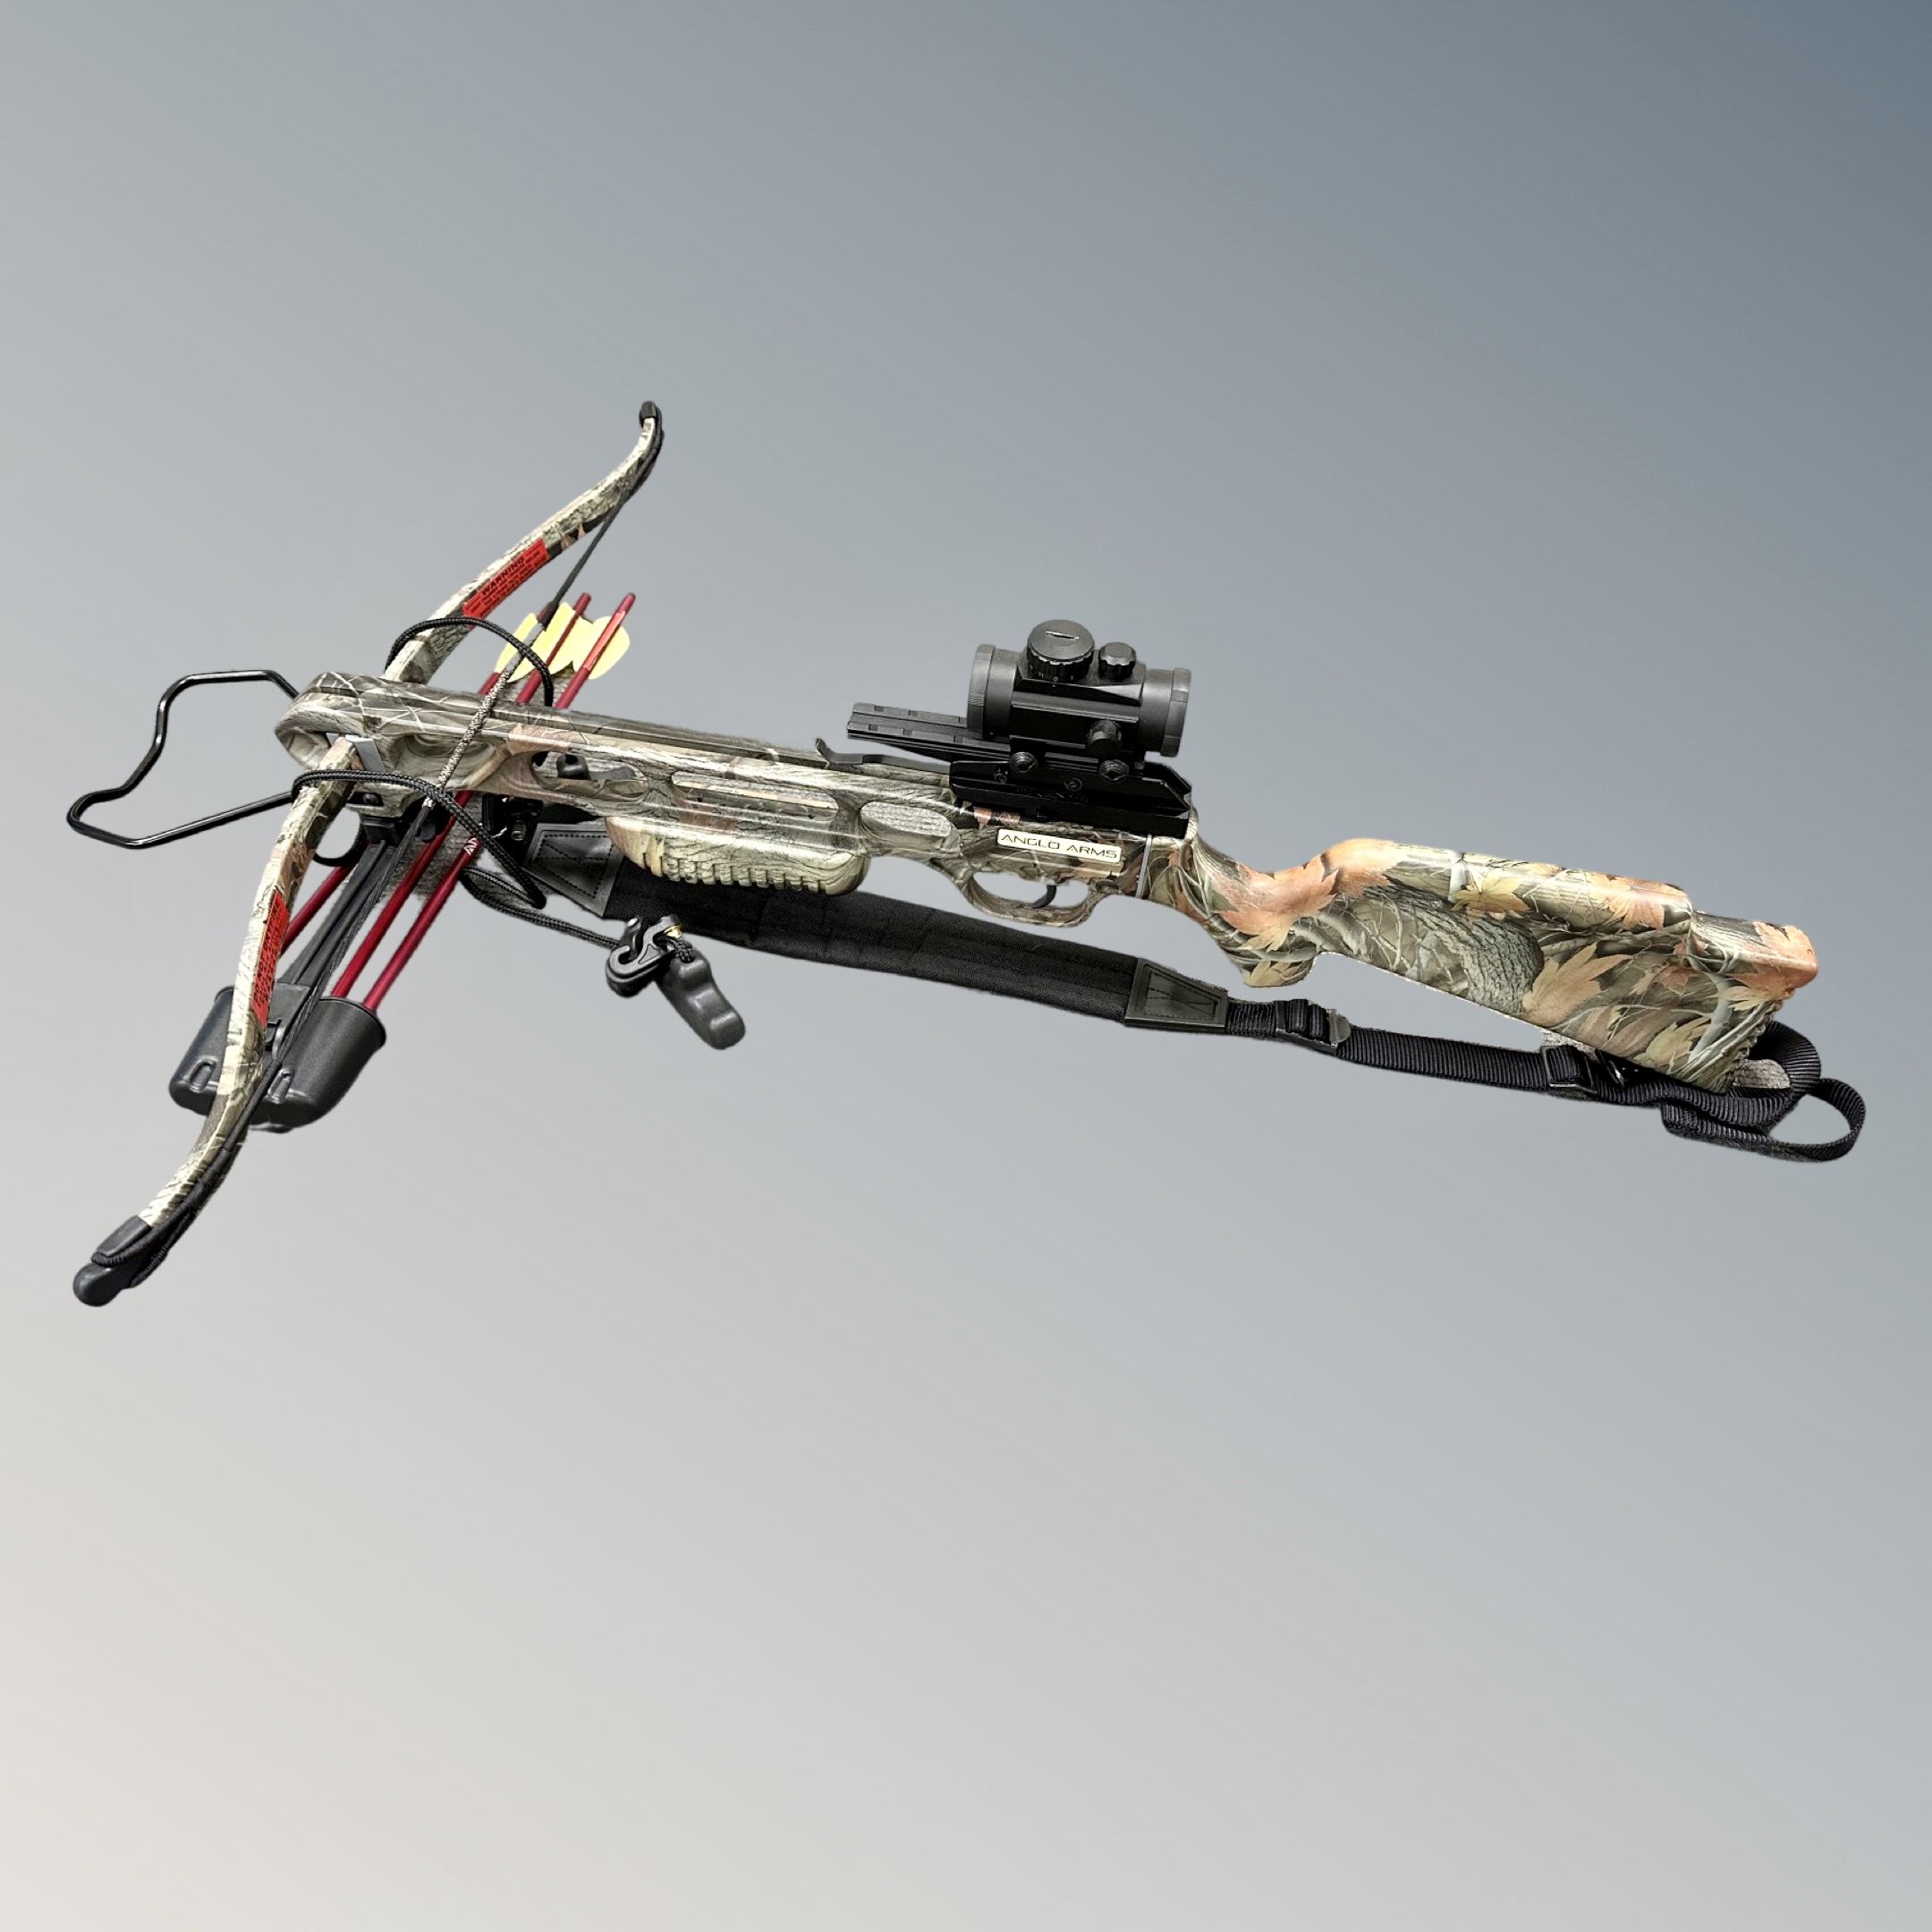 An Anglo Arms crossbow with several bolts, scope, camo stock and drawing pull cord.